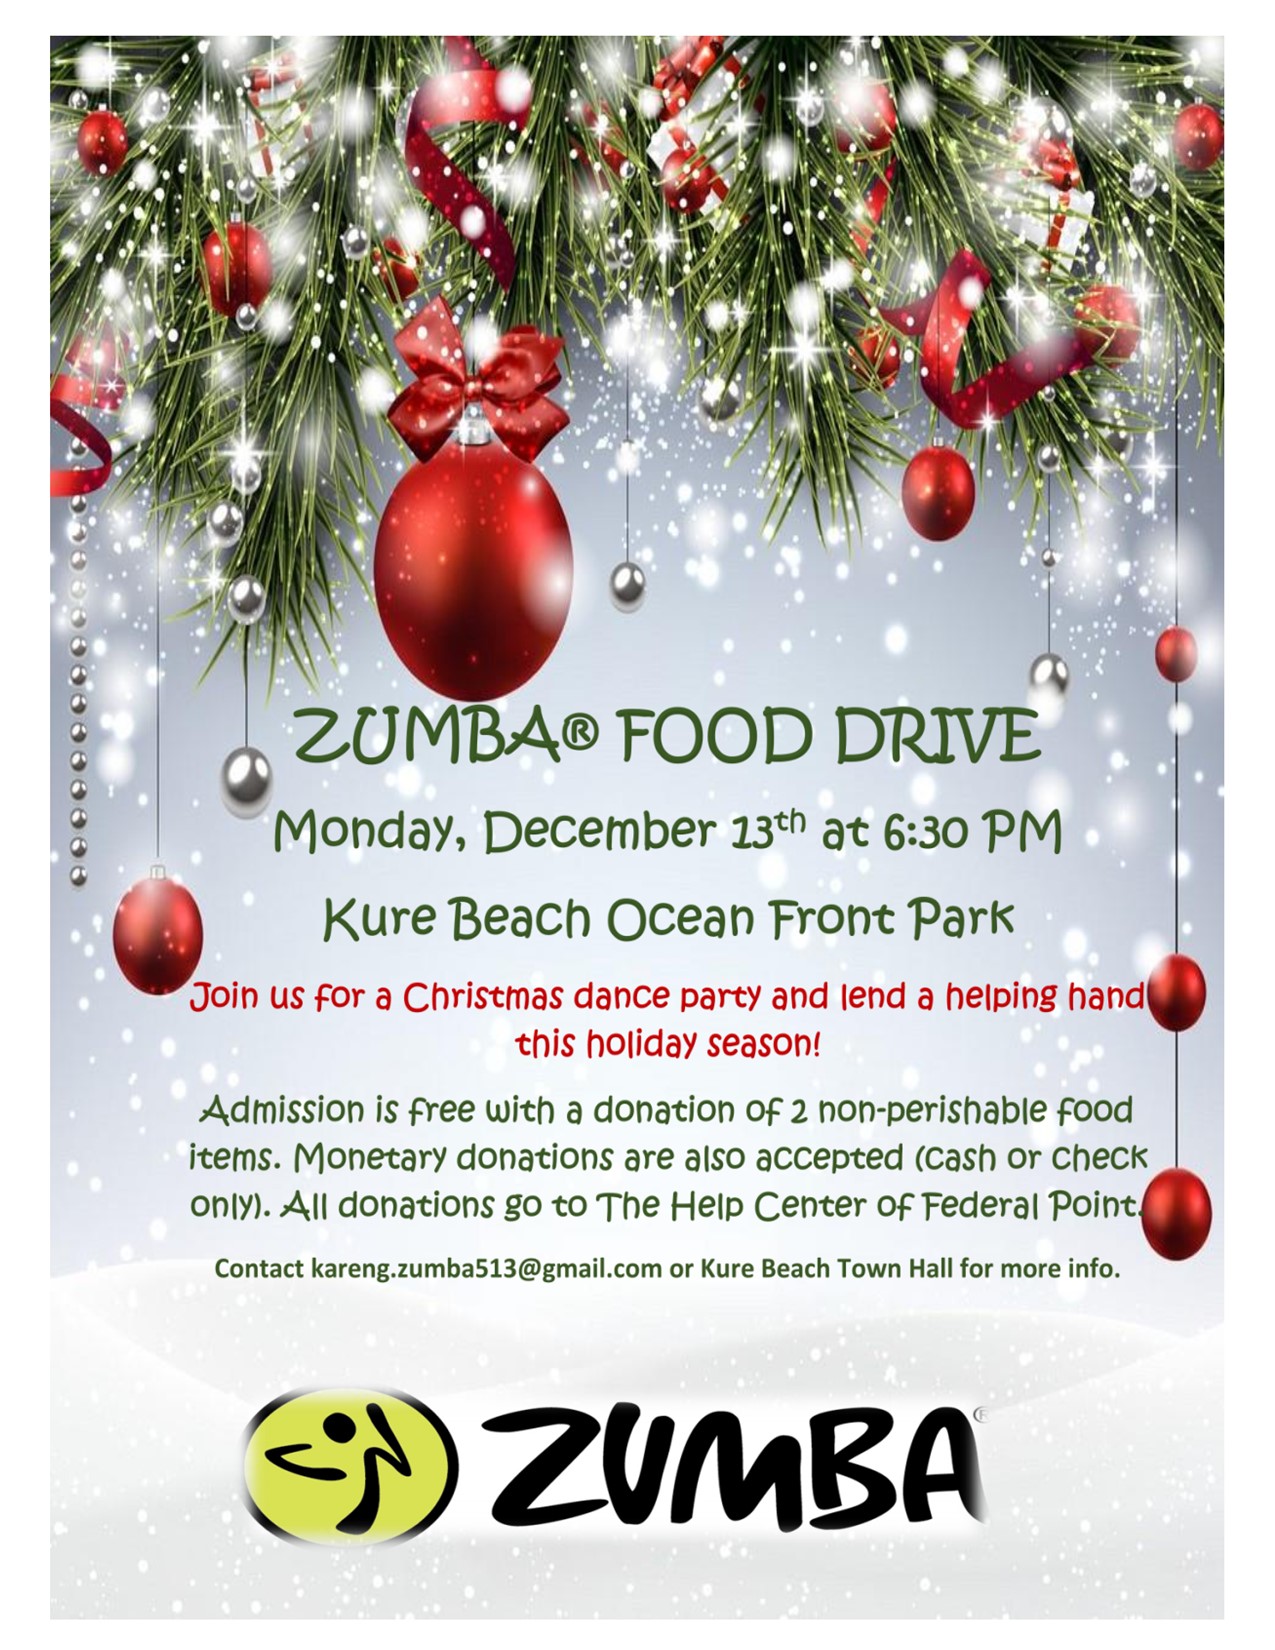 Zumba Food Drive details on a Festive Background